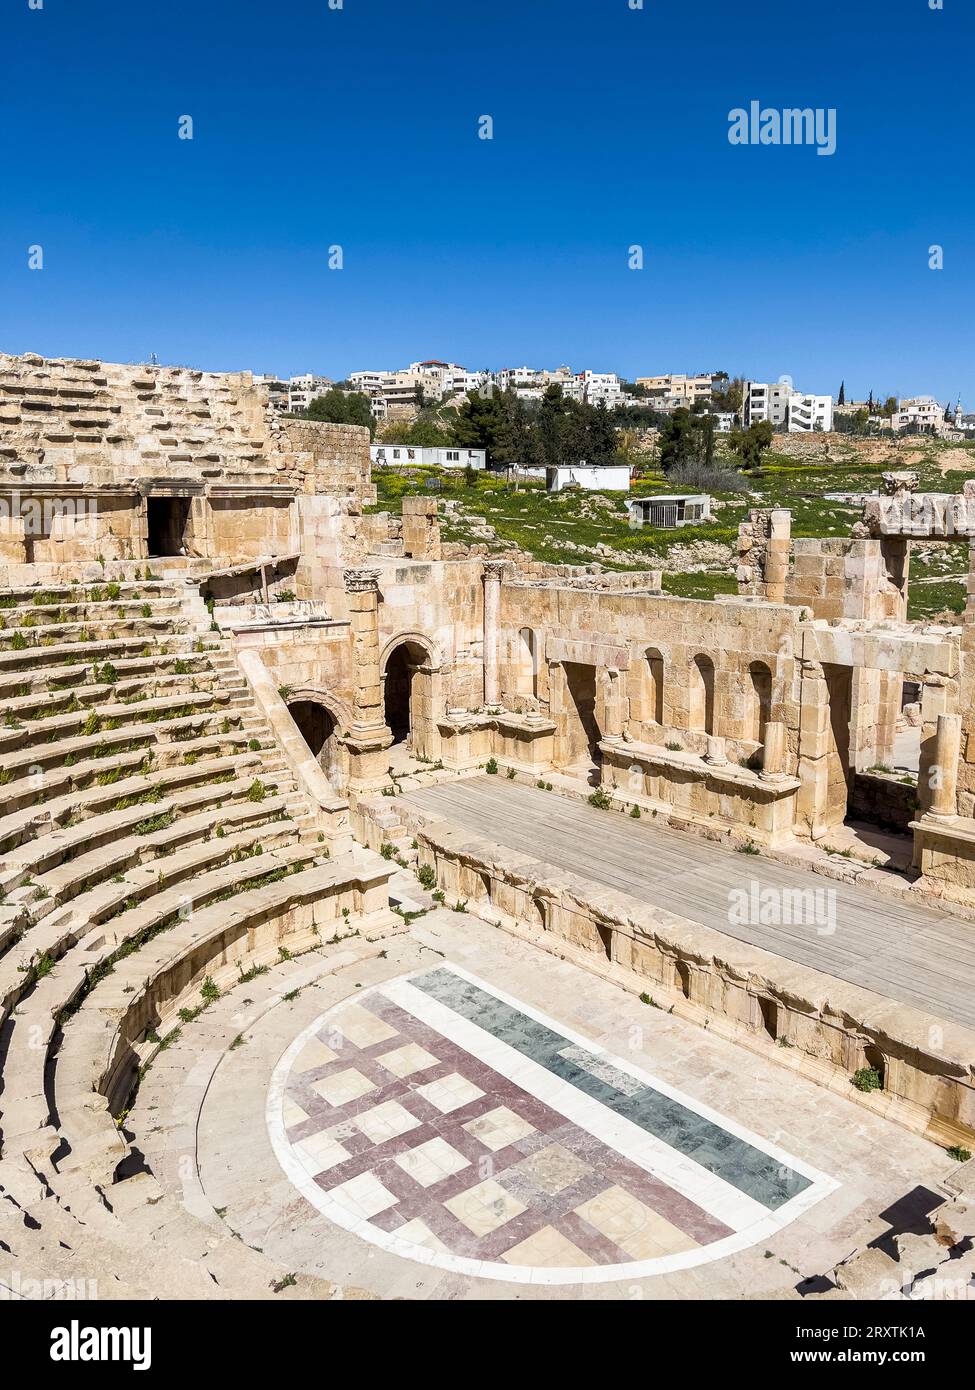 The great North Theater in the ancient city of Jerash, believed to be founded in 331 BC by Alexander the Great, Jerash, Jordan, Middle East Stock Photo